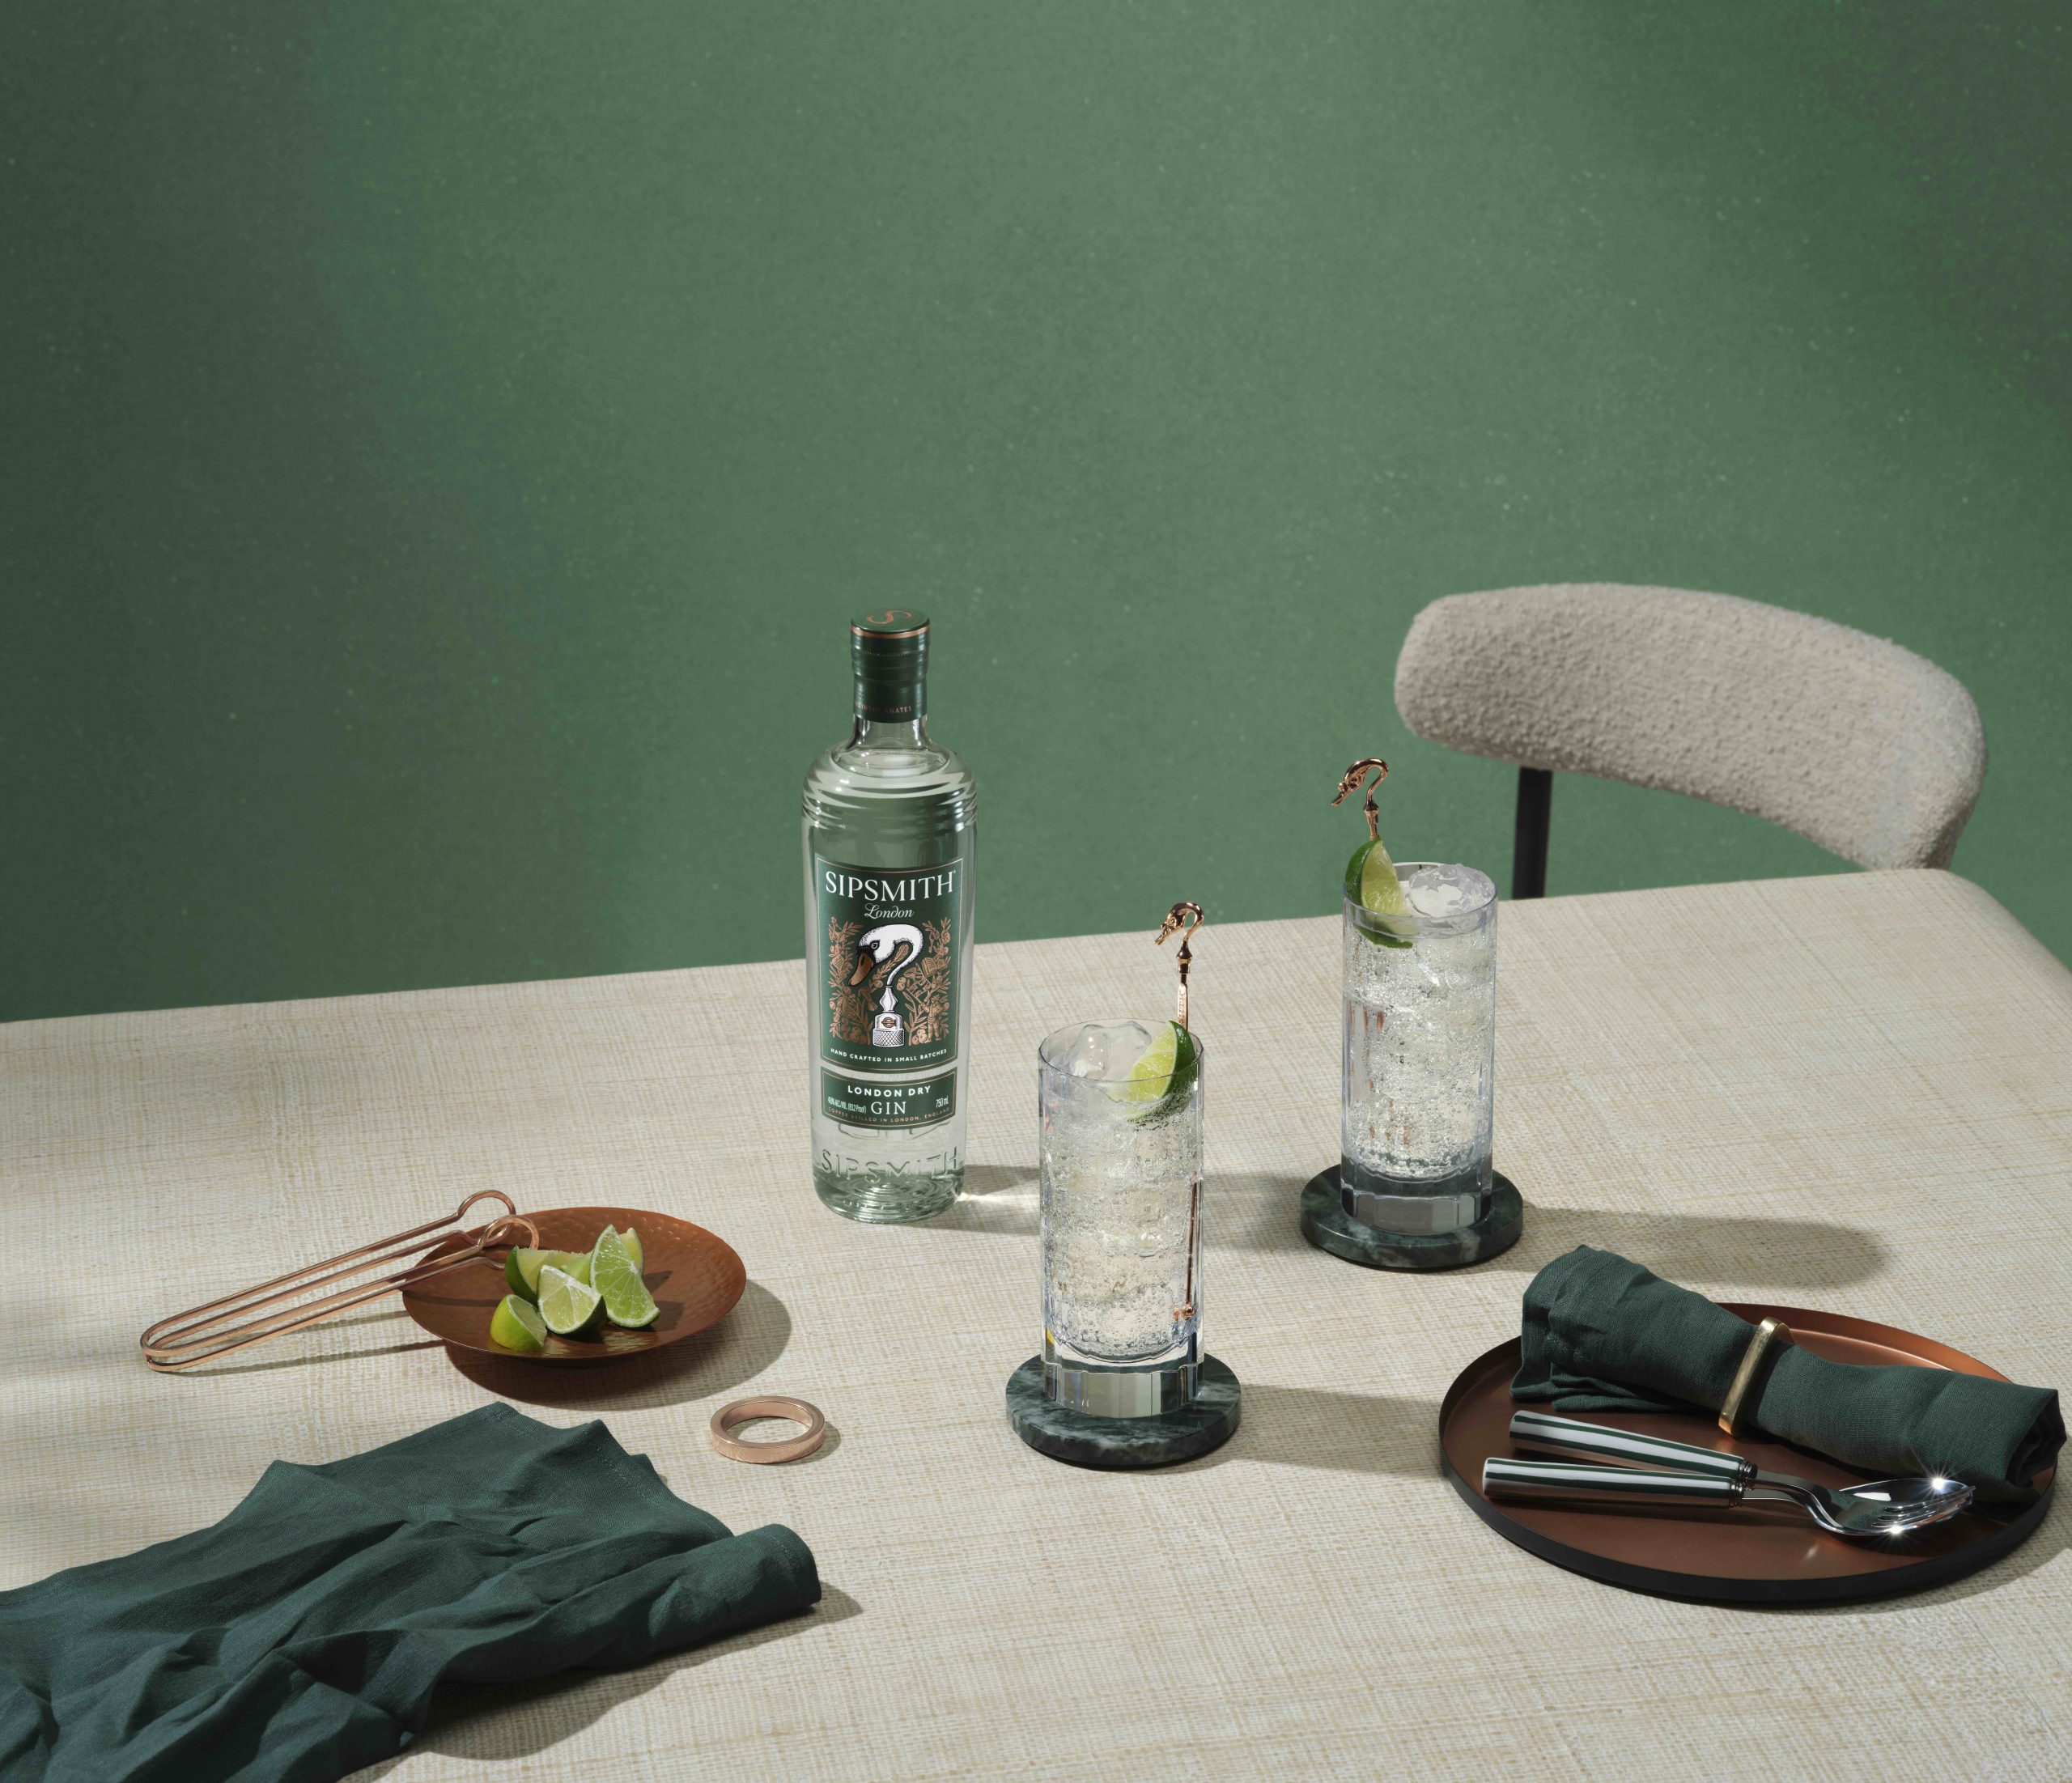 Sipsmith London Classic G and T